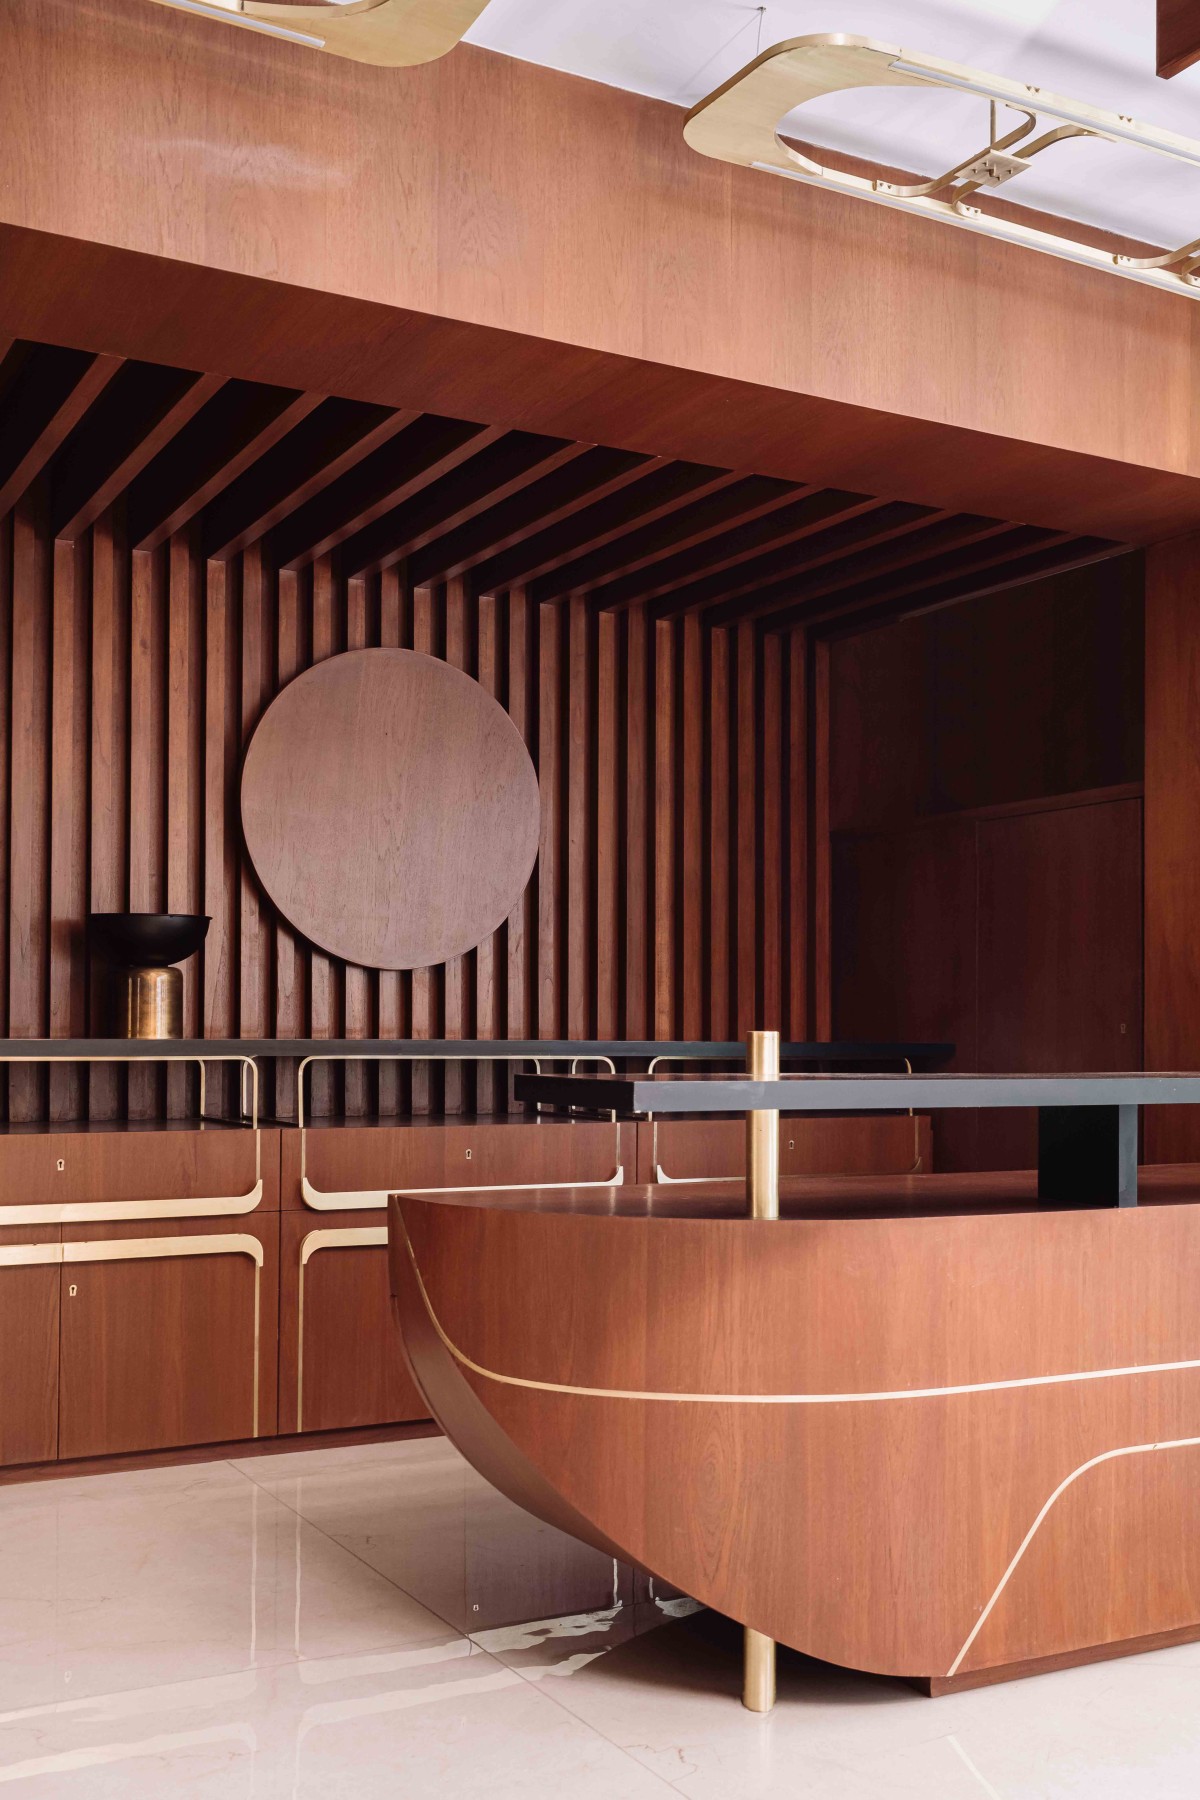 The reception table with brass inlay is accentuated by the wooden panelling in the backdrop